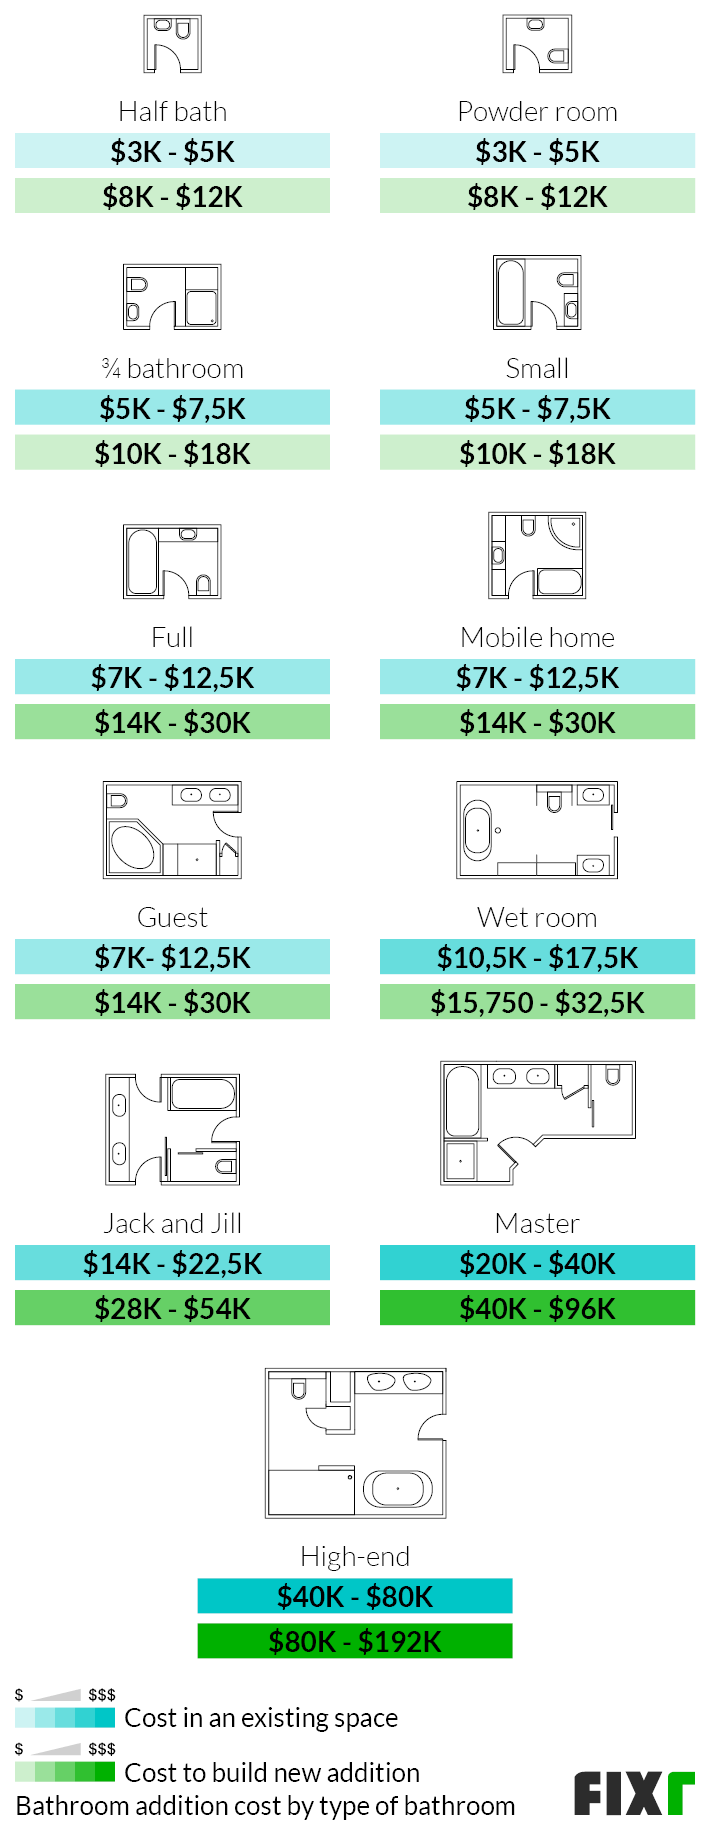 Bathroom Addition Cost, Average Cost Of Adding A Bedroom And Bathroom To House